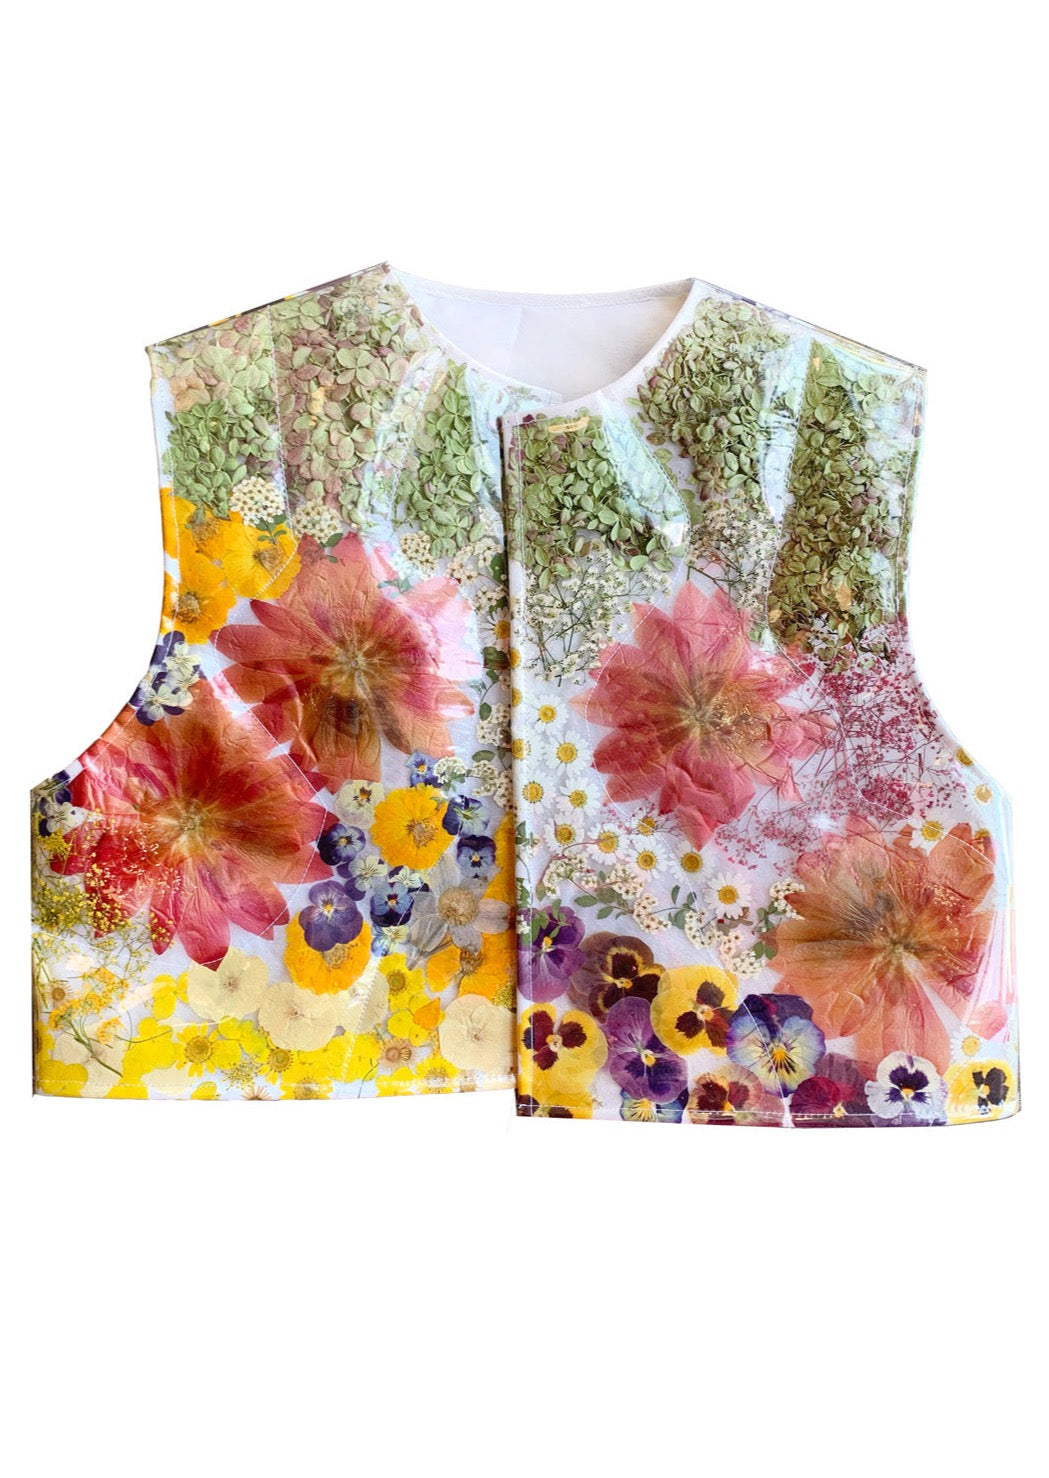 Puffer vest filled with approximately 1,000 real flowers-- everything from peonies to hydrangeas to pansies. Each vest features a custom floral arrangement by designer Olivia Cheng, and is made-to-order at our New York City studio